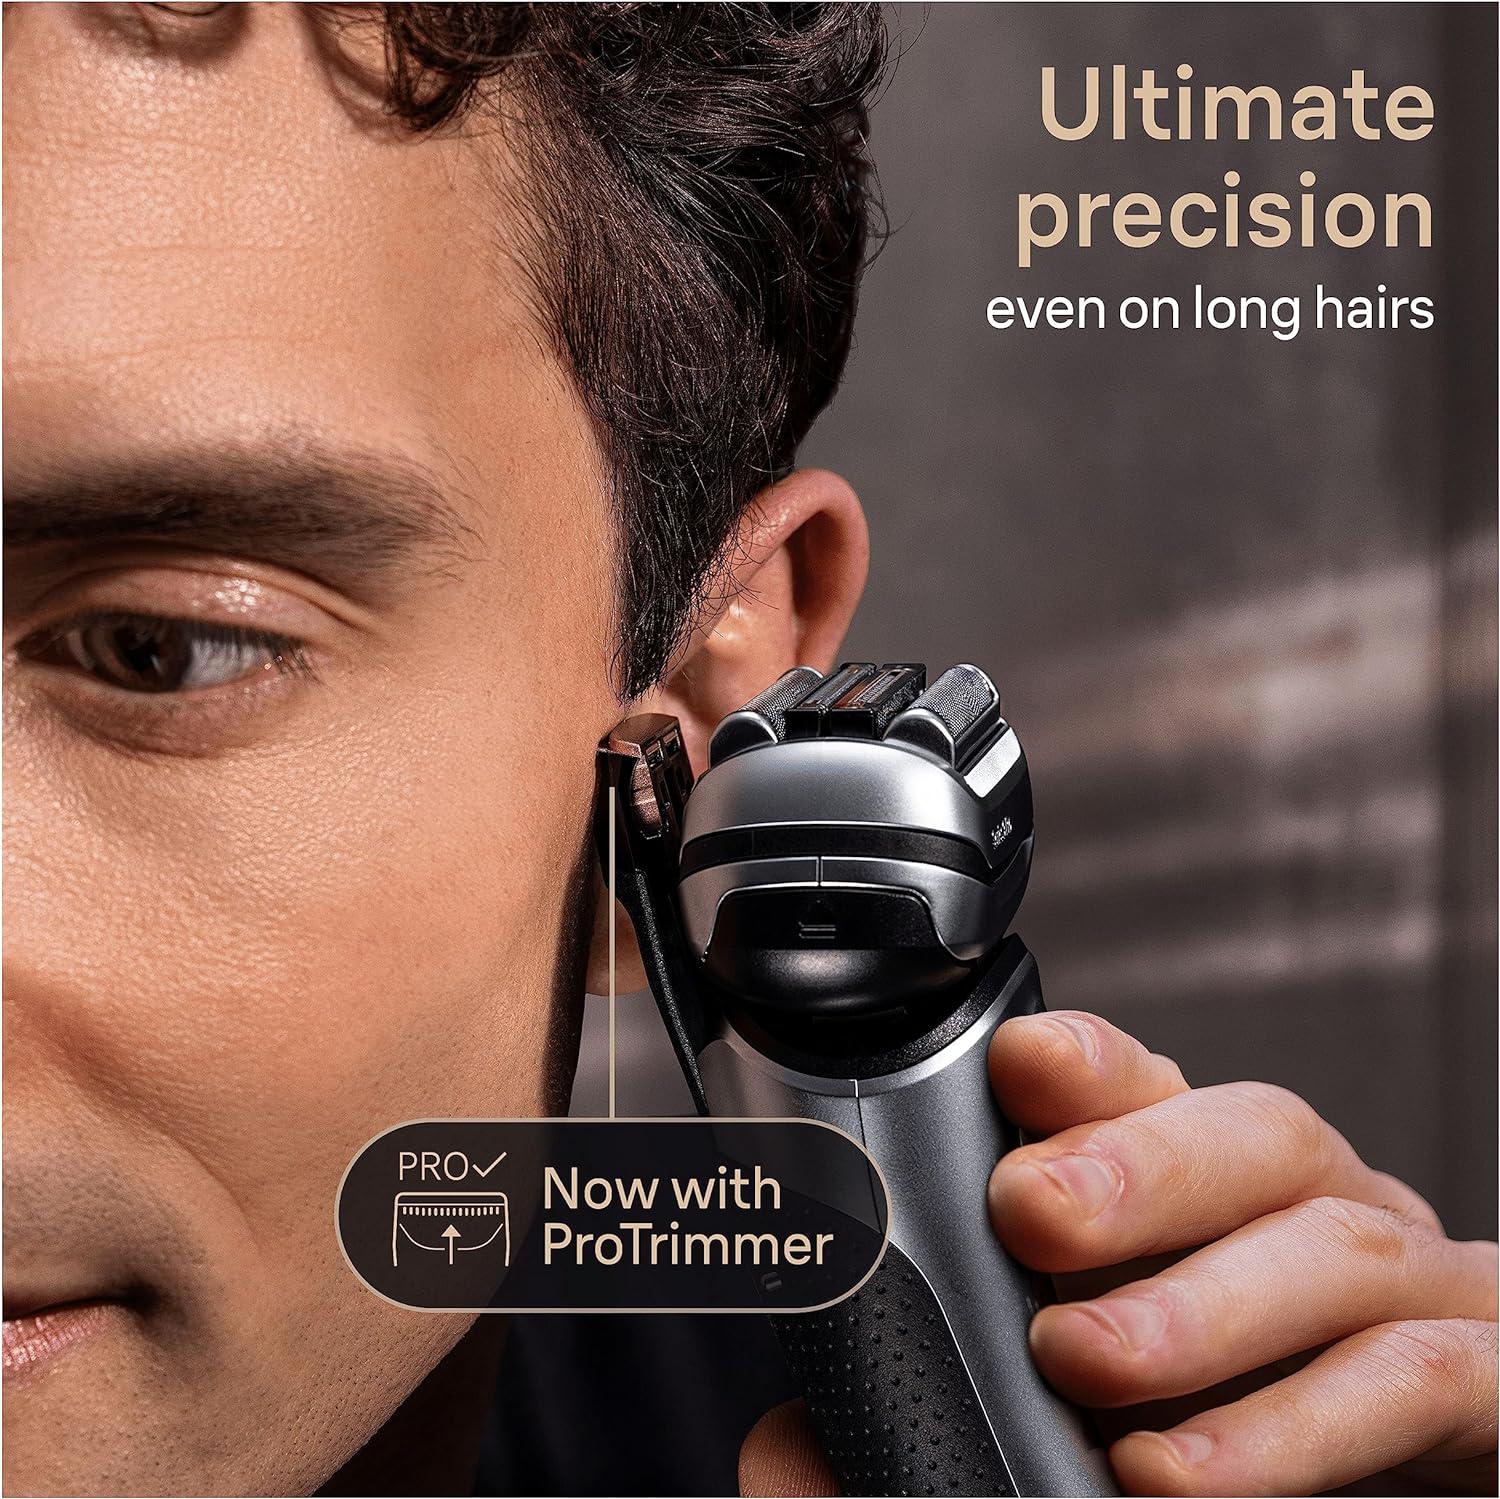 Braun Series 9 Pro+ 9477cc Wet & Dry Shaver with 5-in-1 SmartCare center and PowerCase, silver.